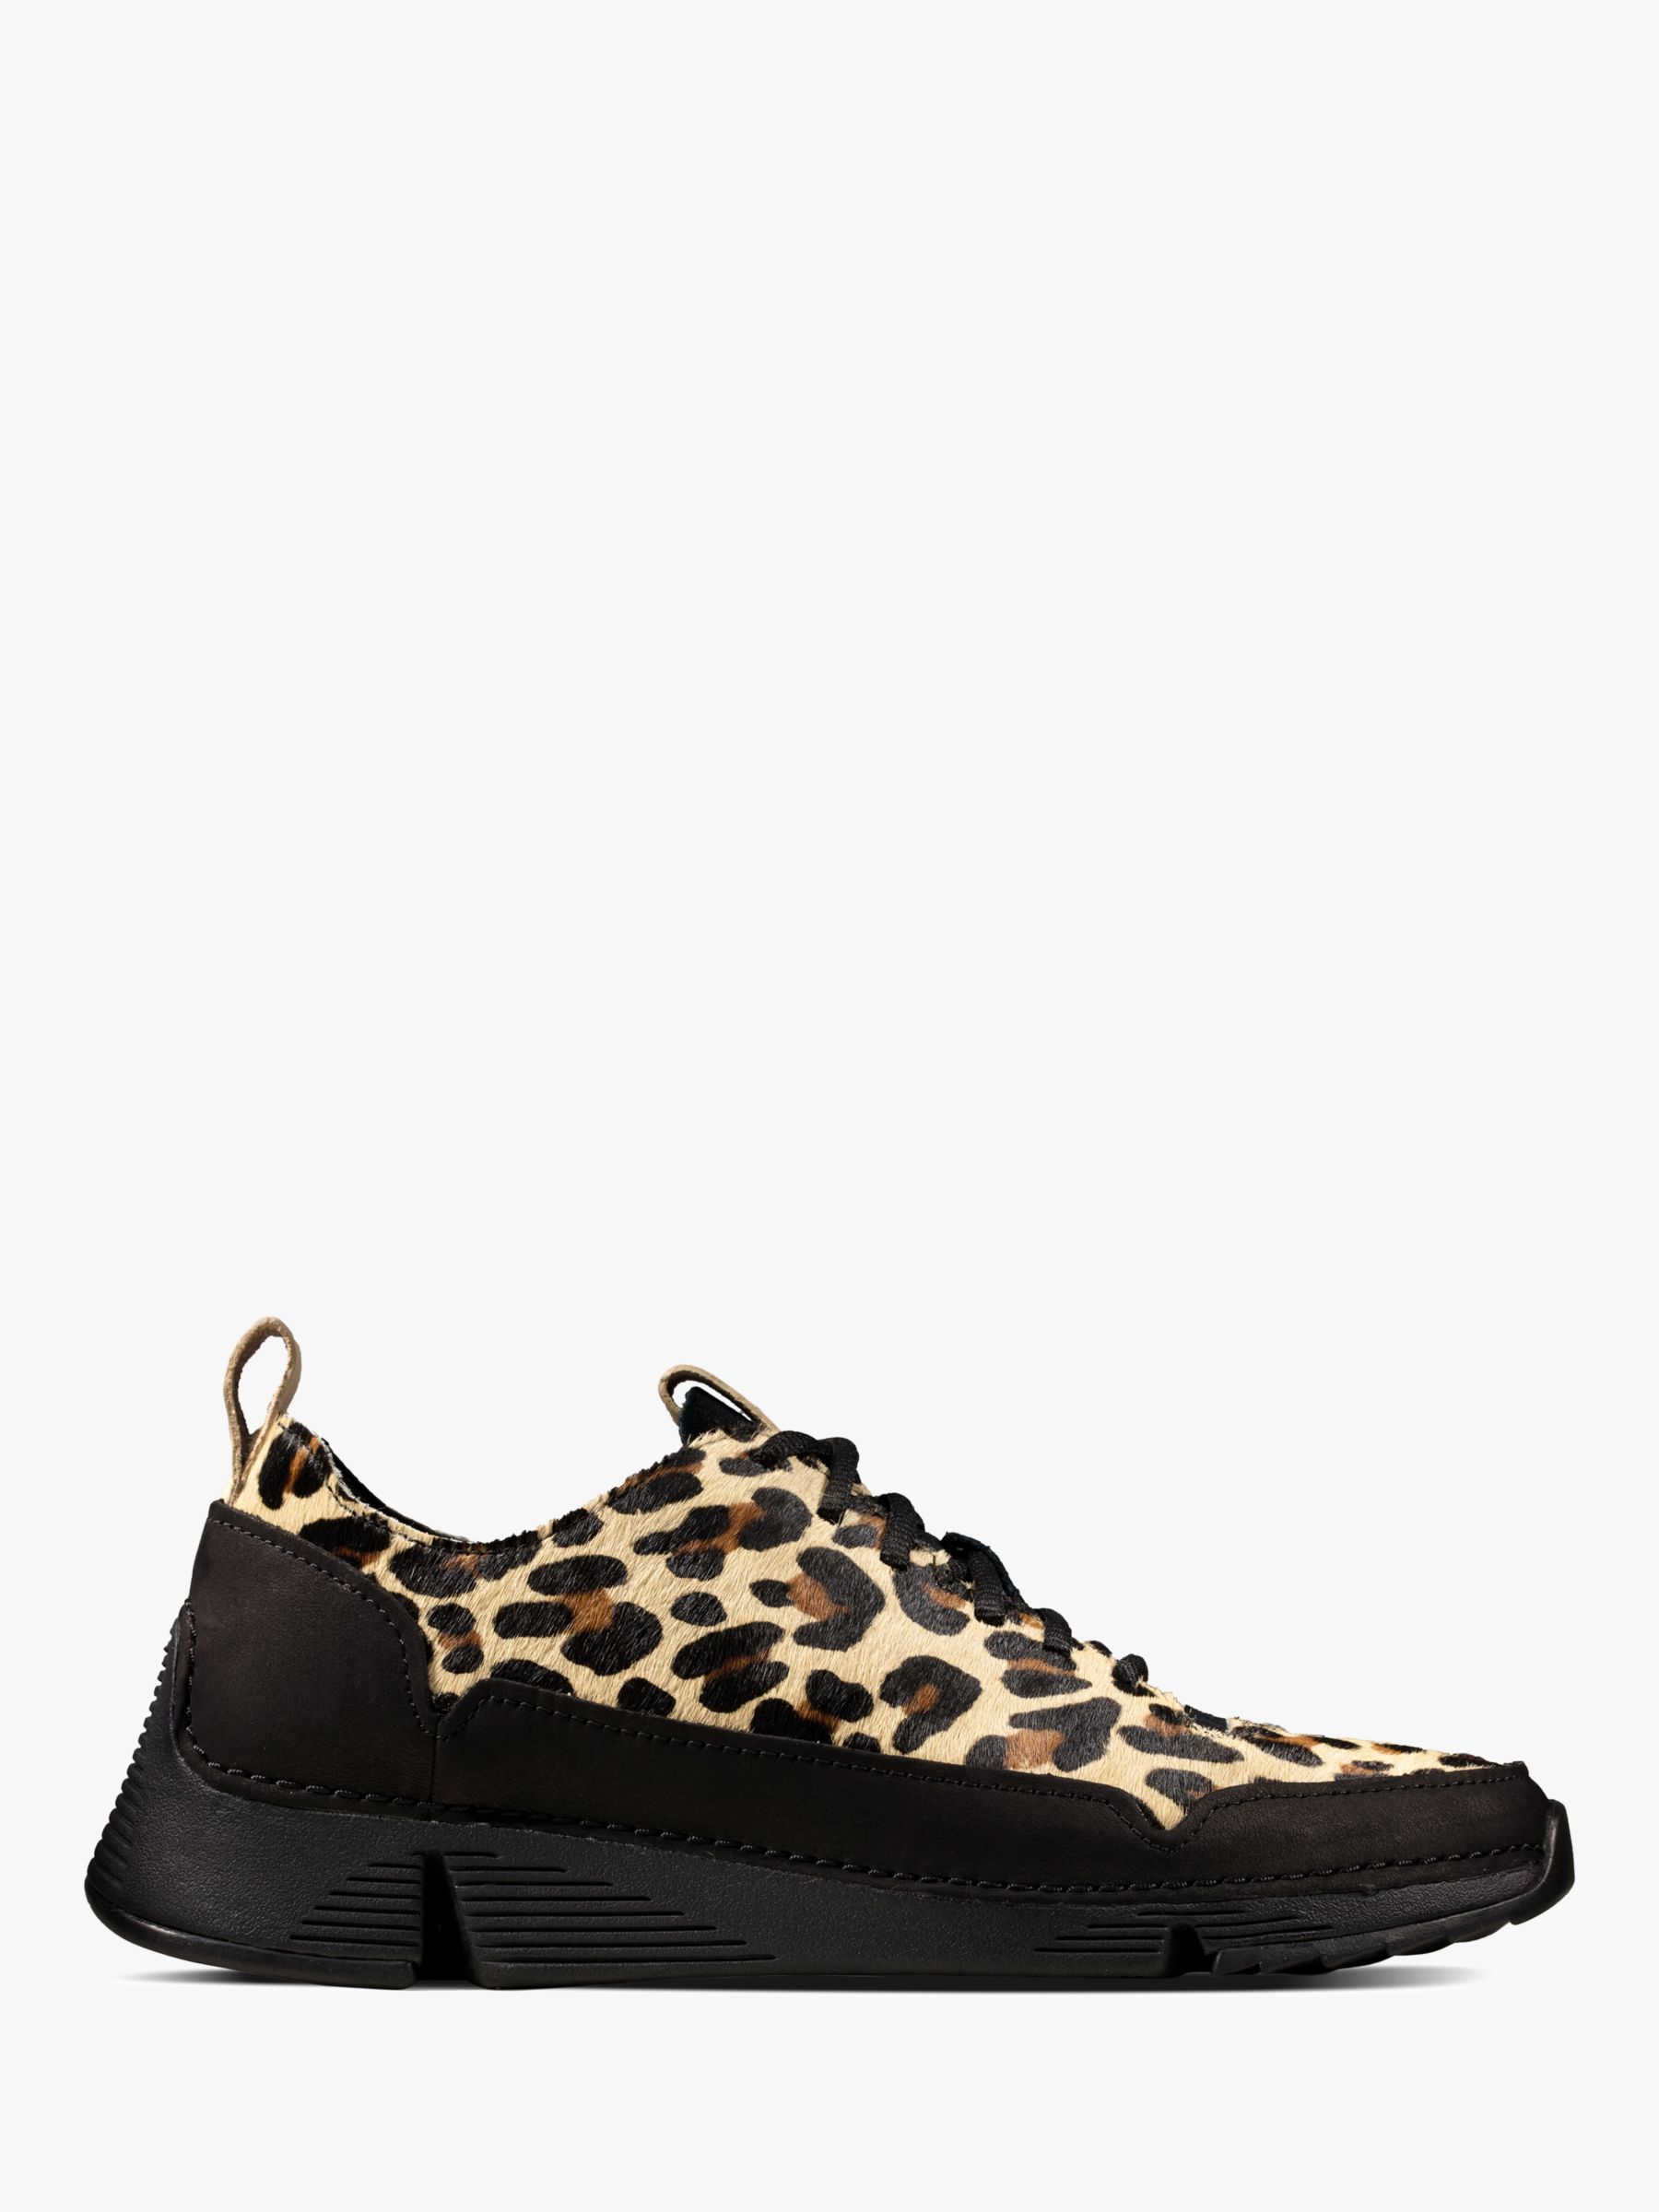 Clarks Tri Spark Leather Trainers, Black/Leopard